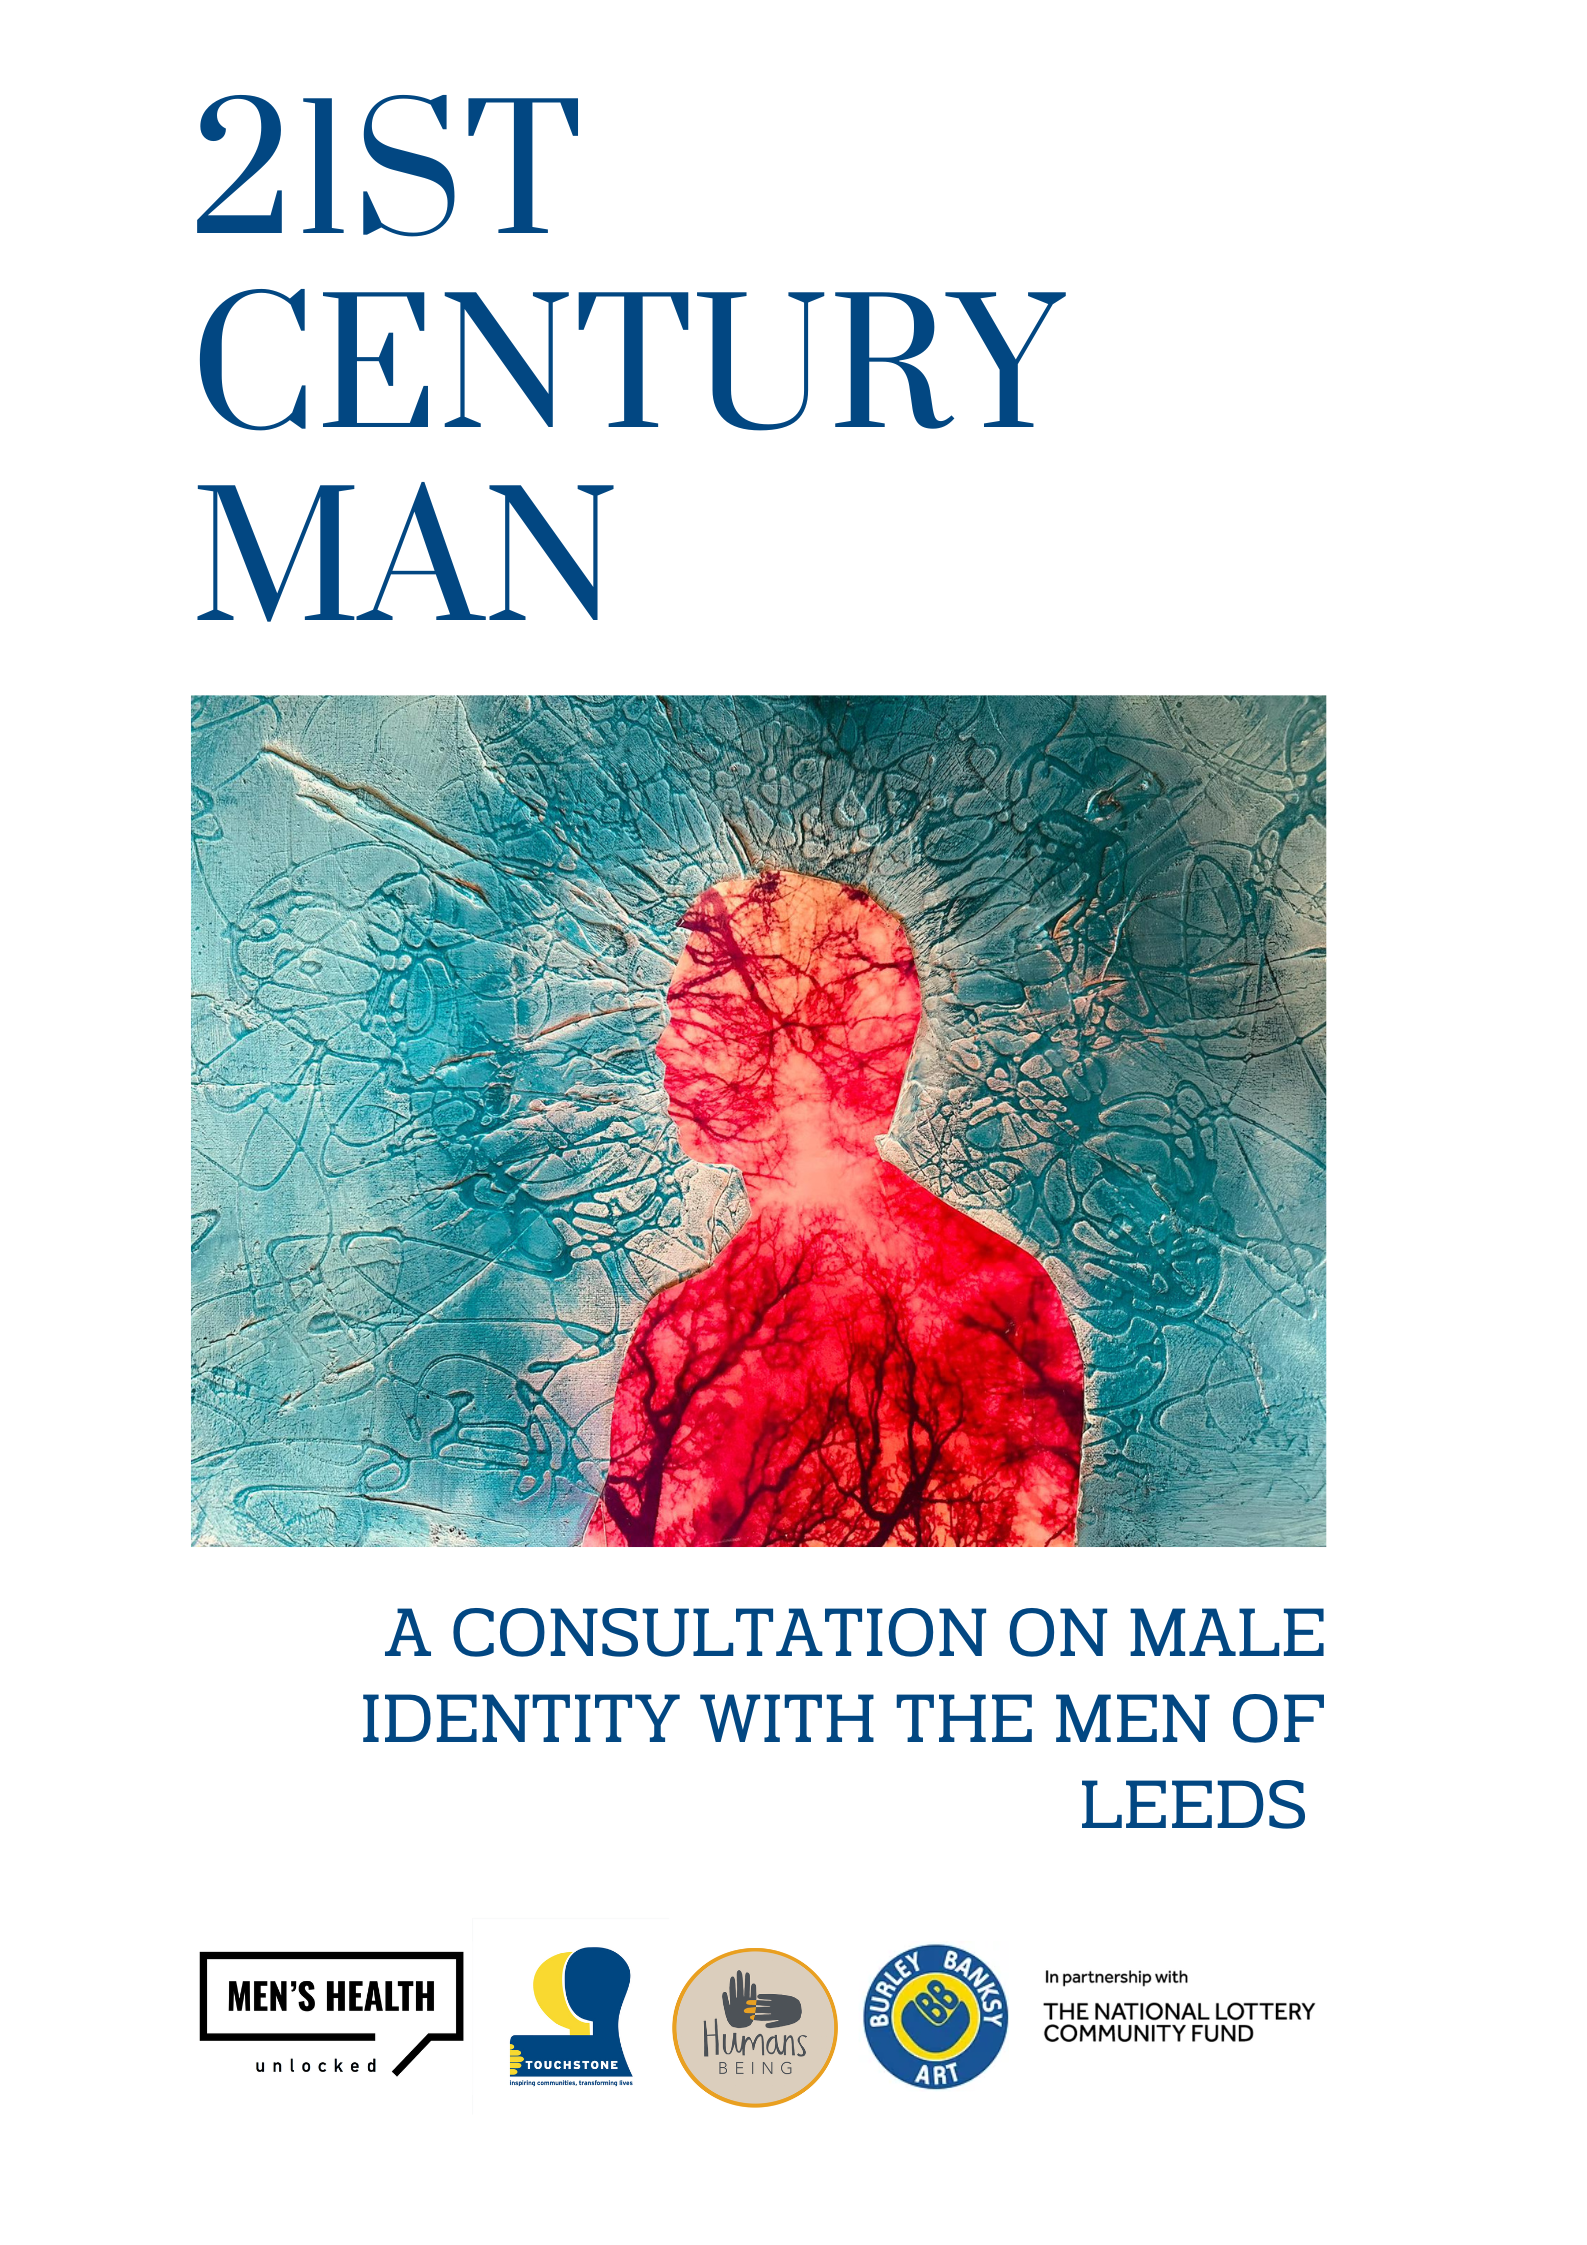 This is the poster for the 21st Century Man report. There is a painting of a man in red on a blue background. There appears to be veins or tree trunks in and around the man.